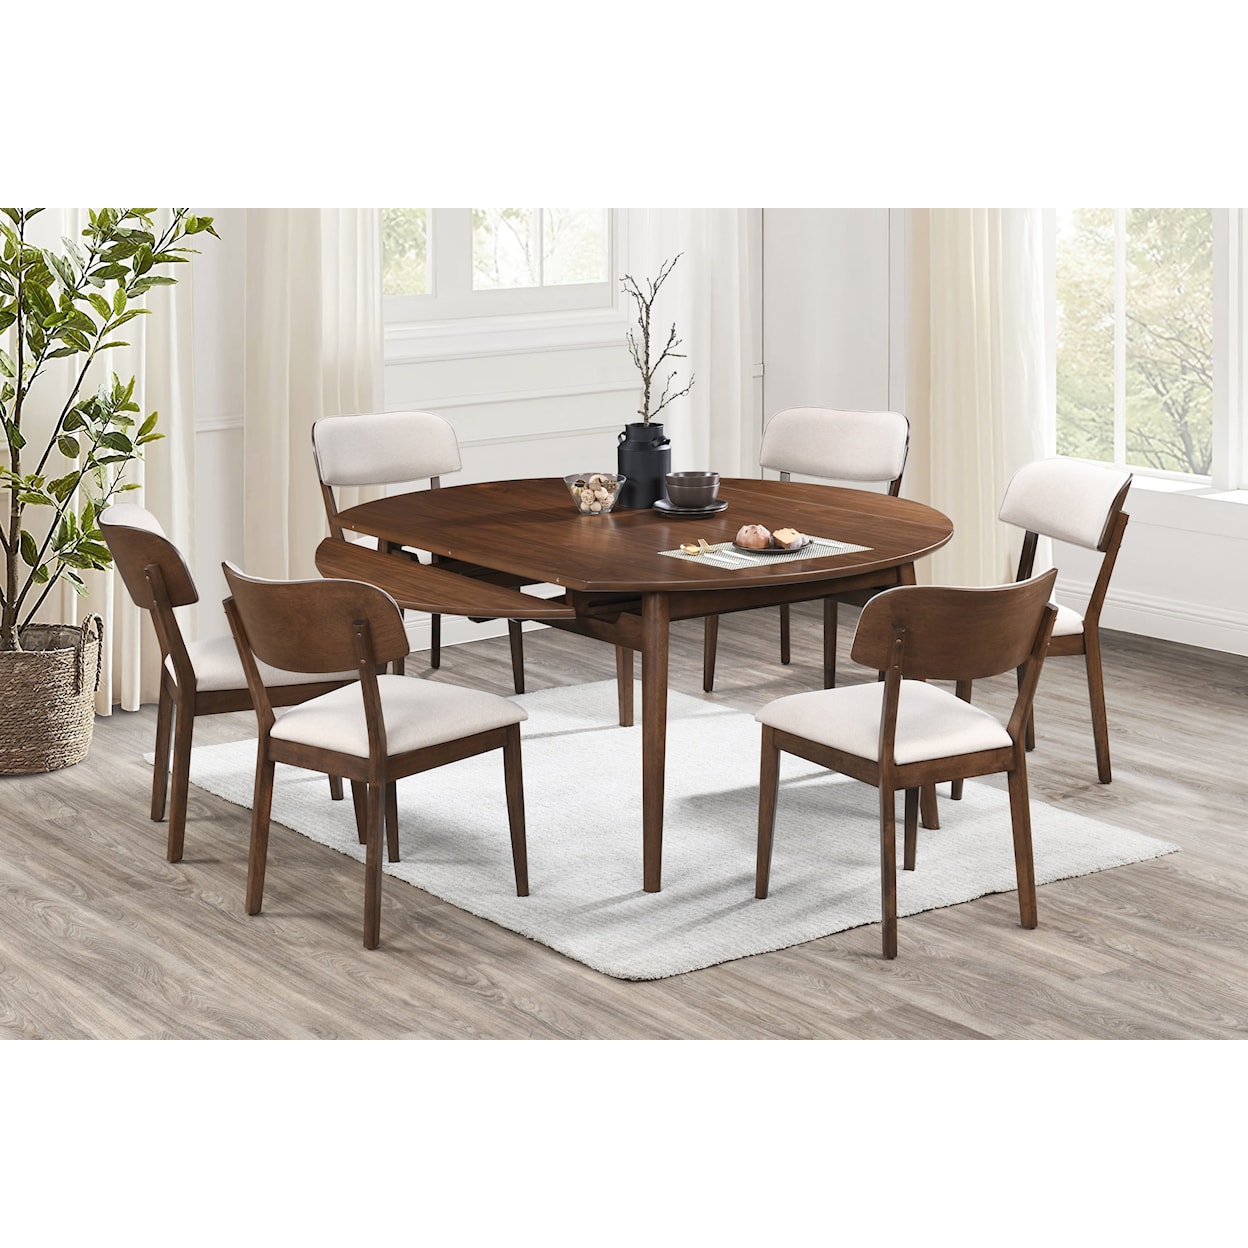 New Classic Furniture Bergen Dining Table